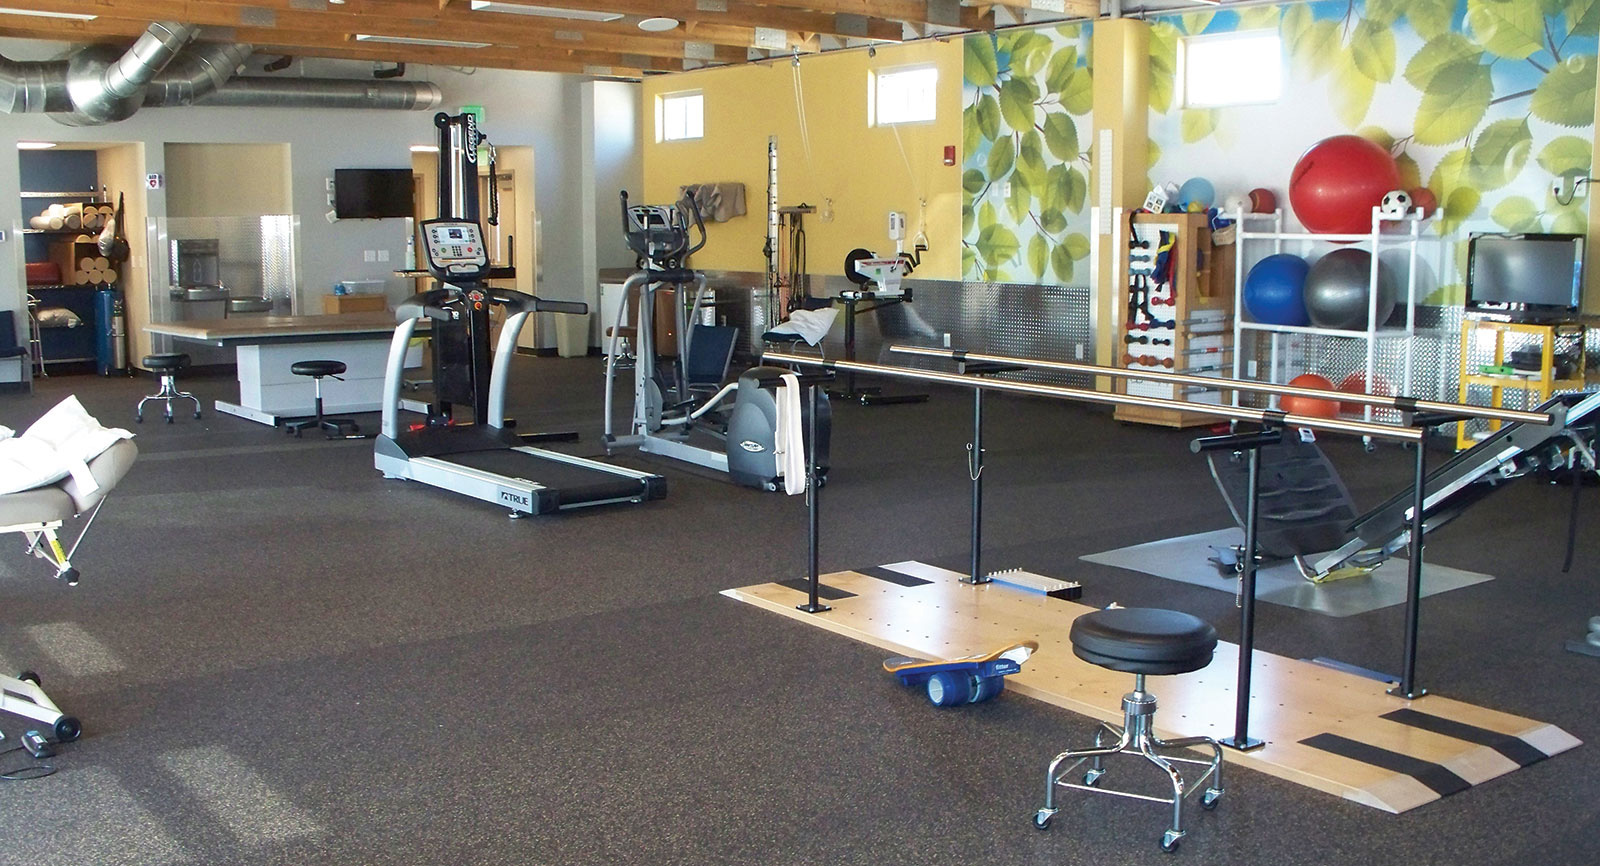 Prowers Medical Center Rehabilitation Center and Gym floor with a variety of equipment for patients to use